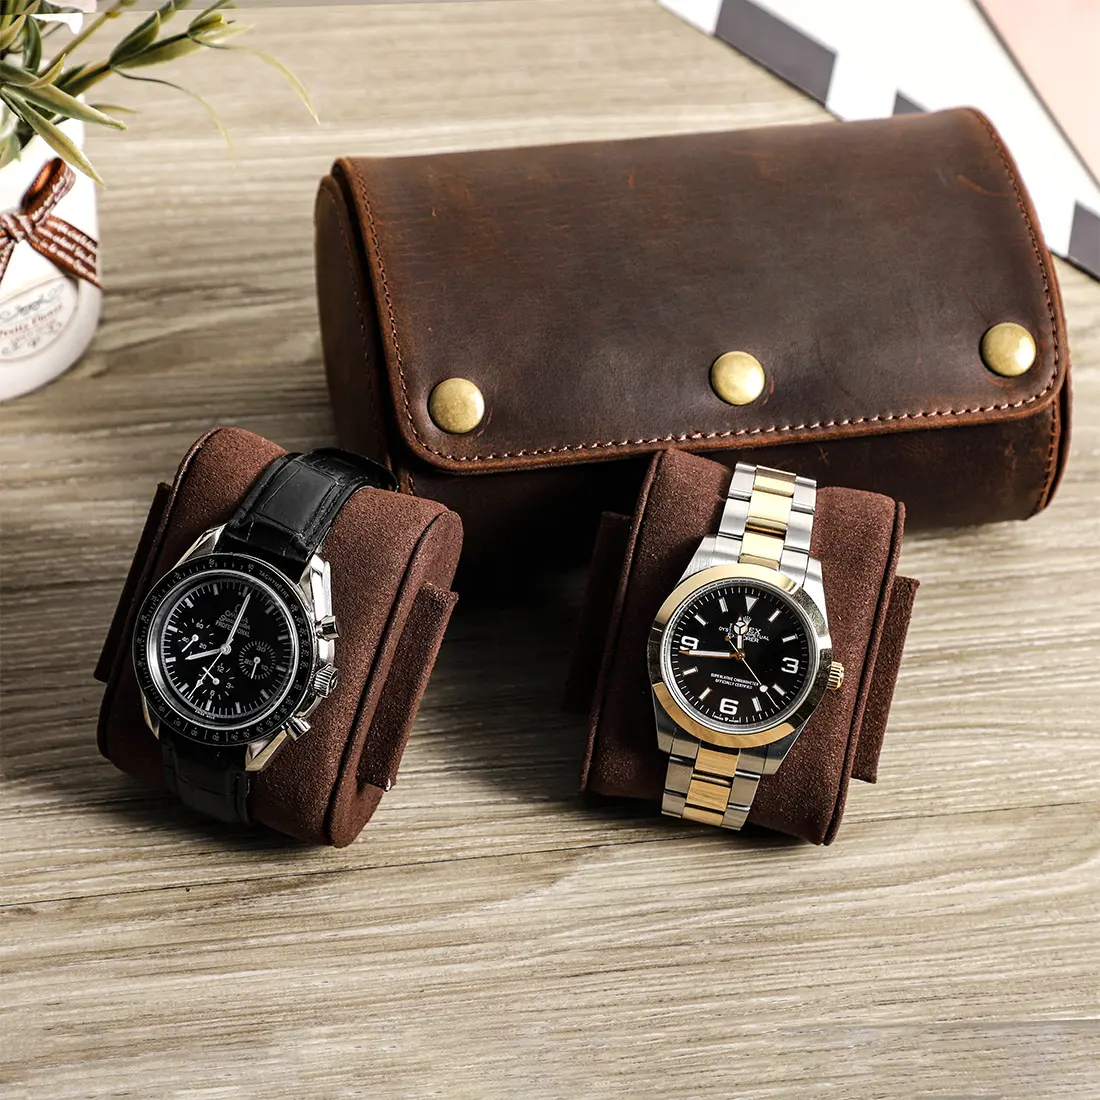 Portable 2 Slot Watch Display Case Organizer Real Leather Travel Watch Roll Case with Sliding Pillow